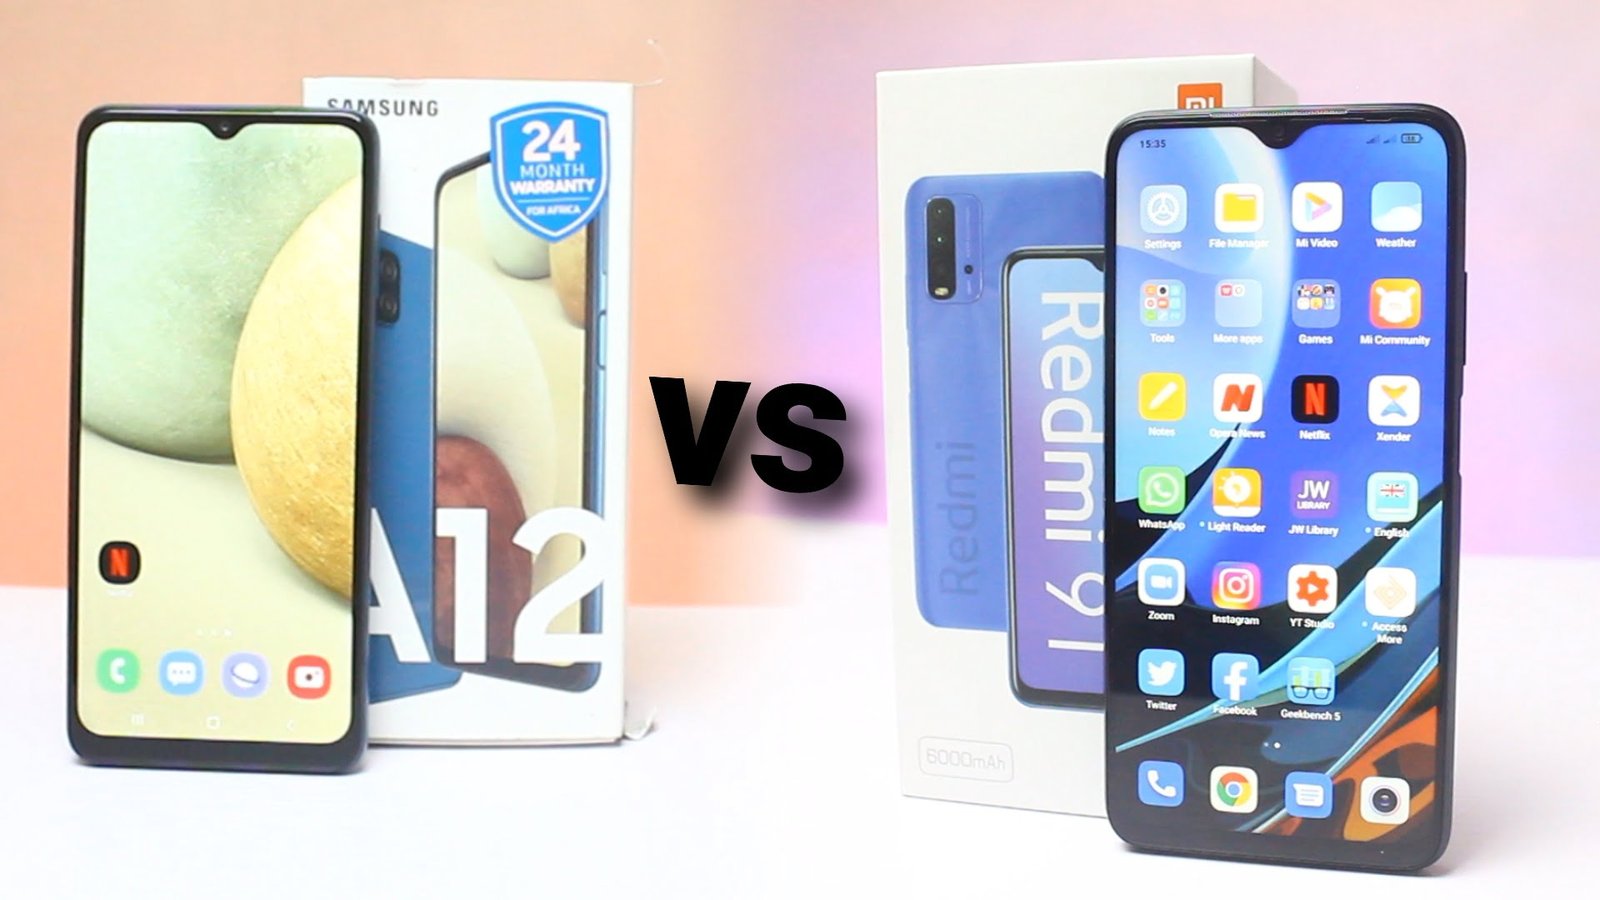 Samsung Galaxy A12 vs Redmi 9T: Which is Better?